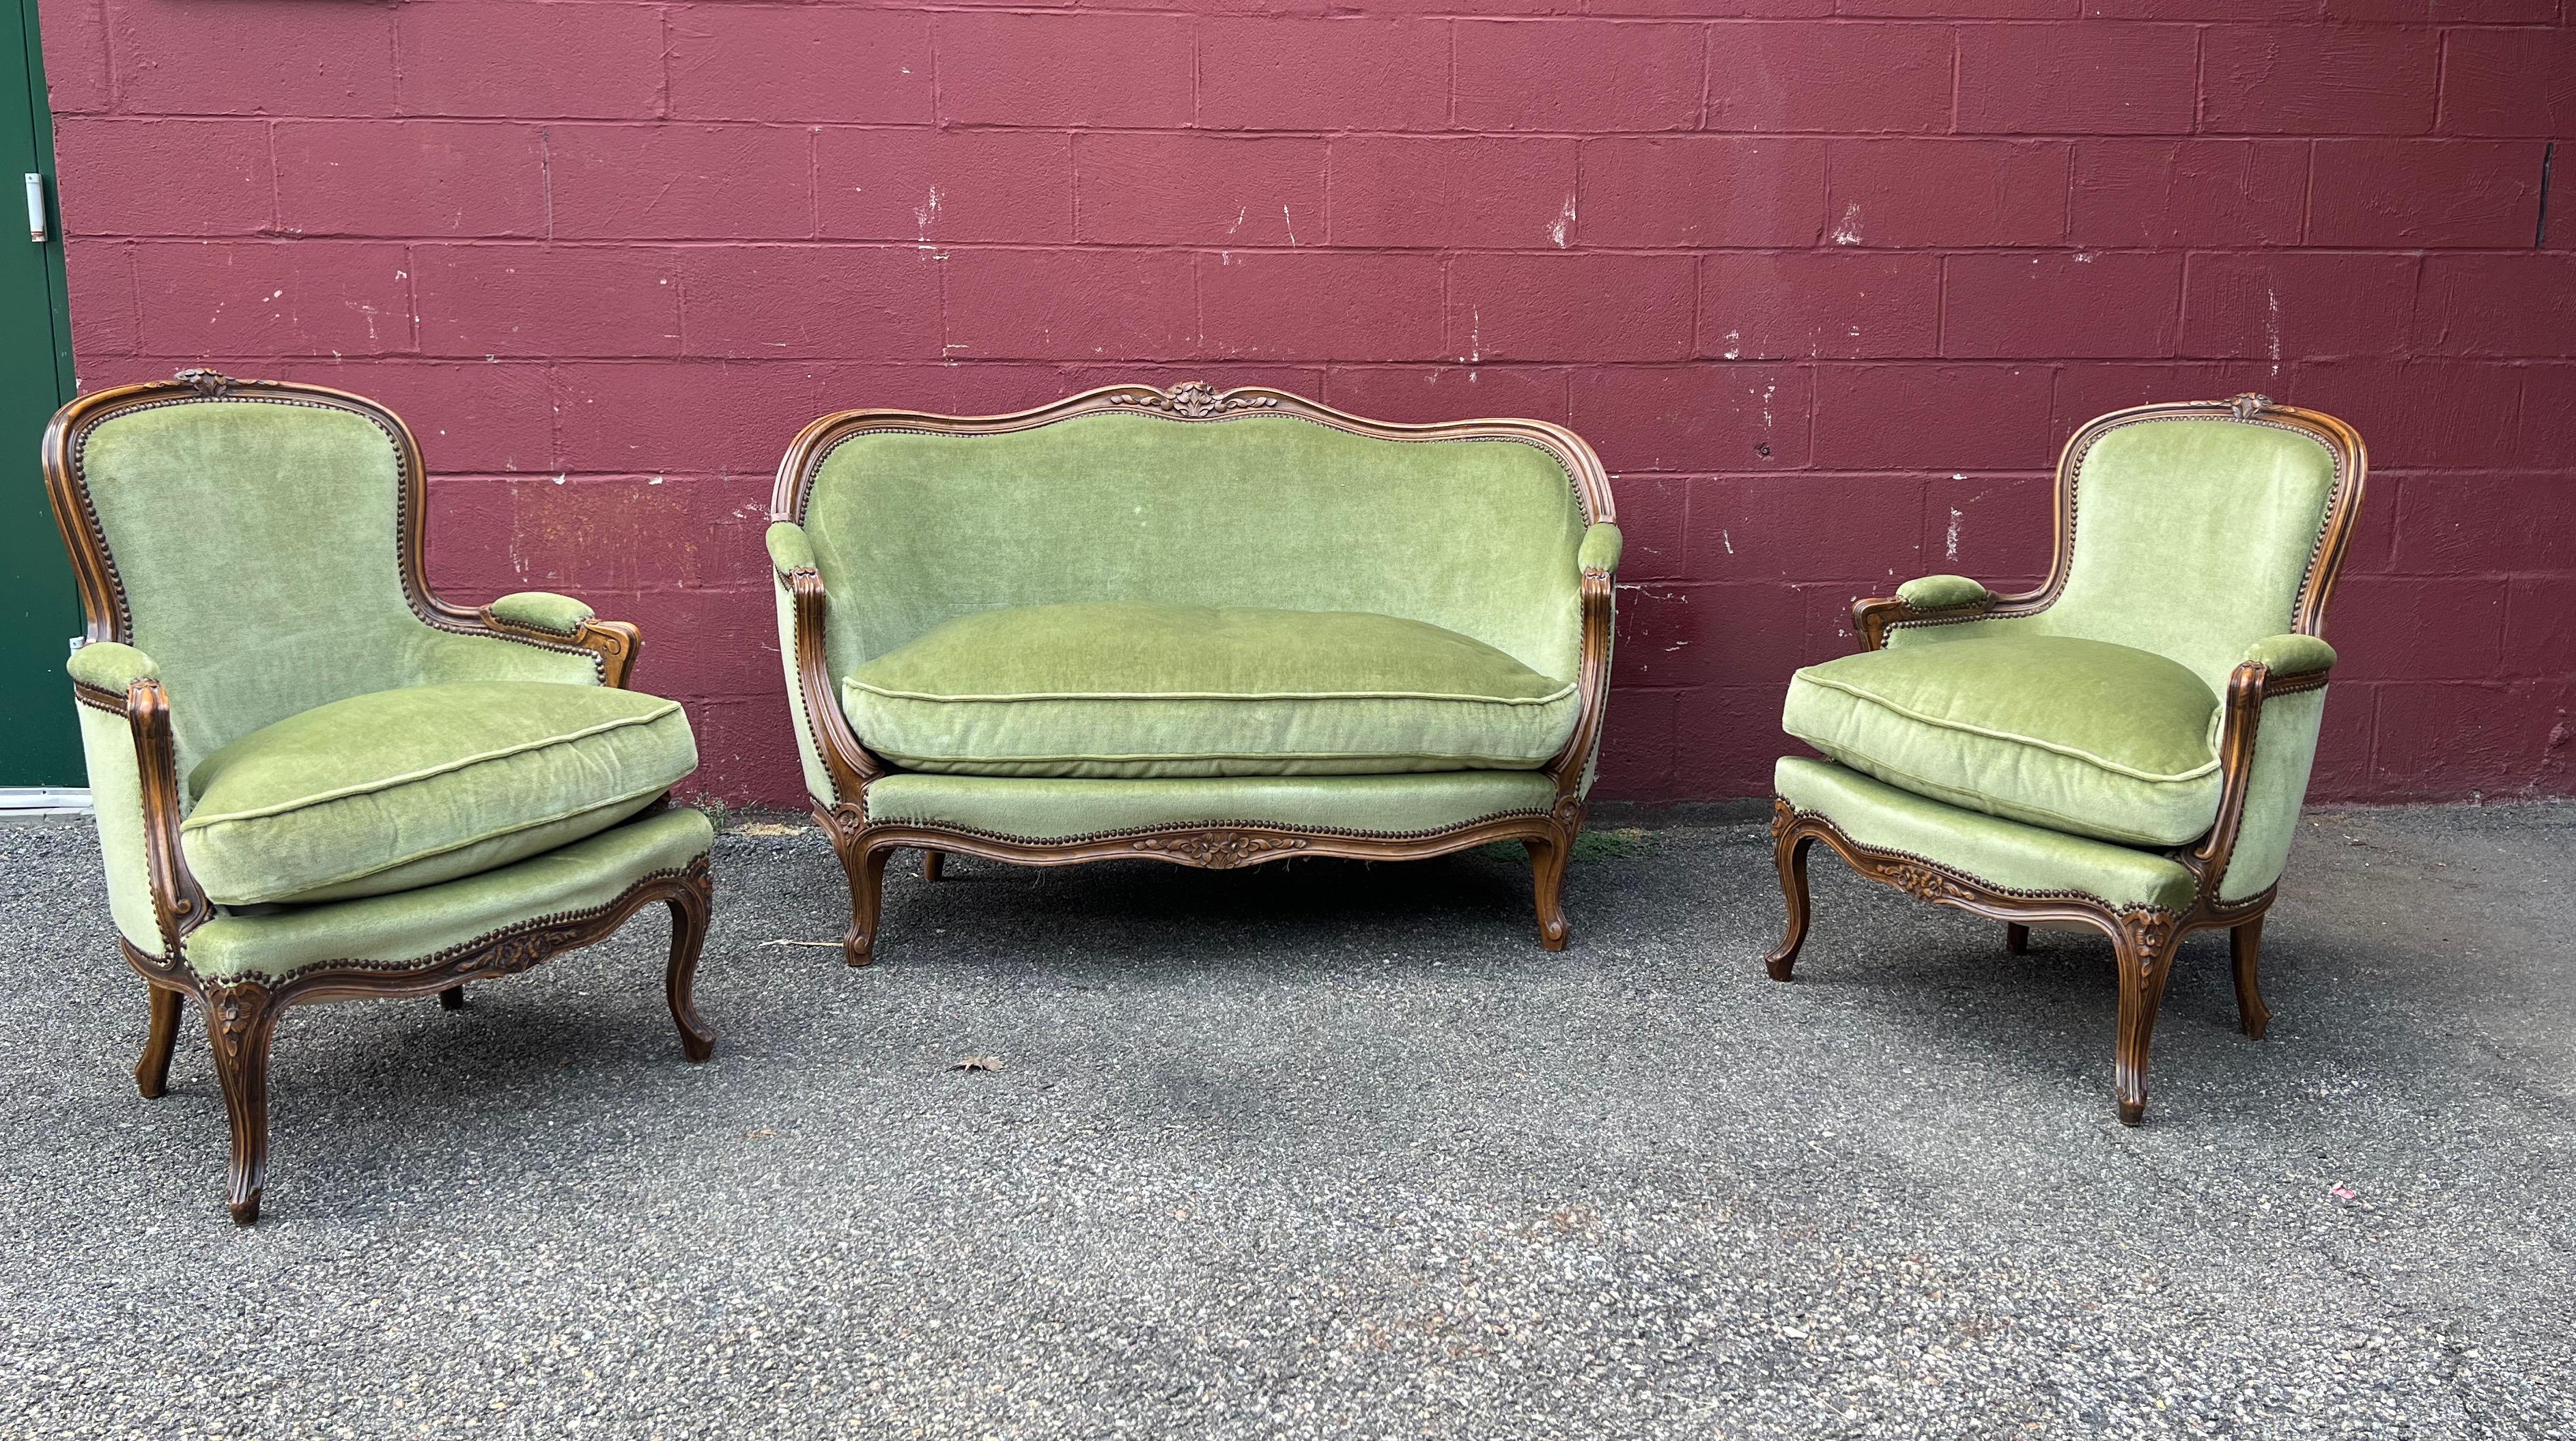 A classic French Louis XV style settee upholstered in a rich medium green velvet. The fruitwood frame has hand carved floral motifs and graceful curved legs. Very good vintage condition. This sofa is part of a set that has a pair of matching